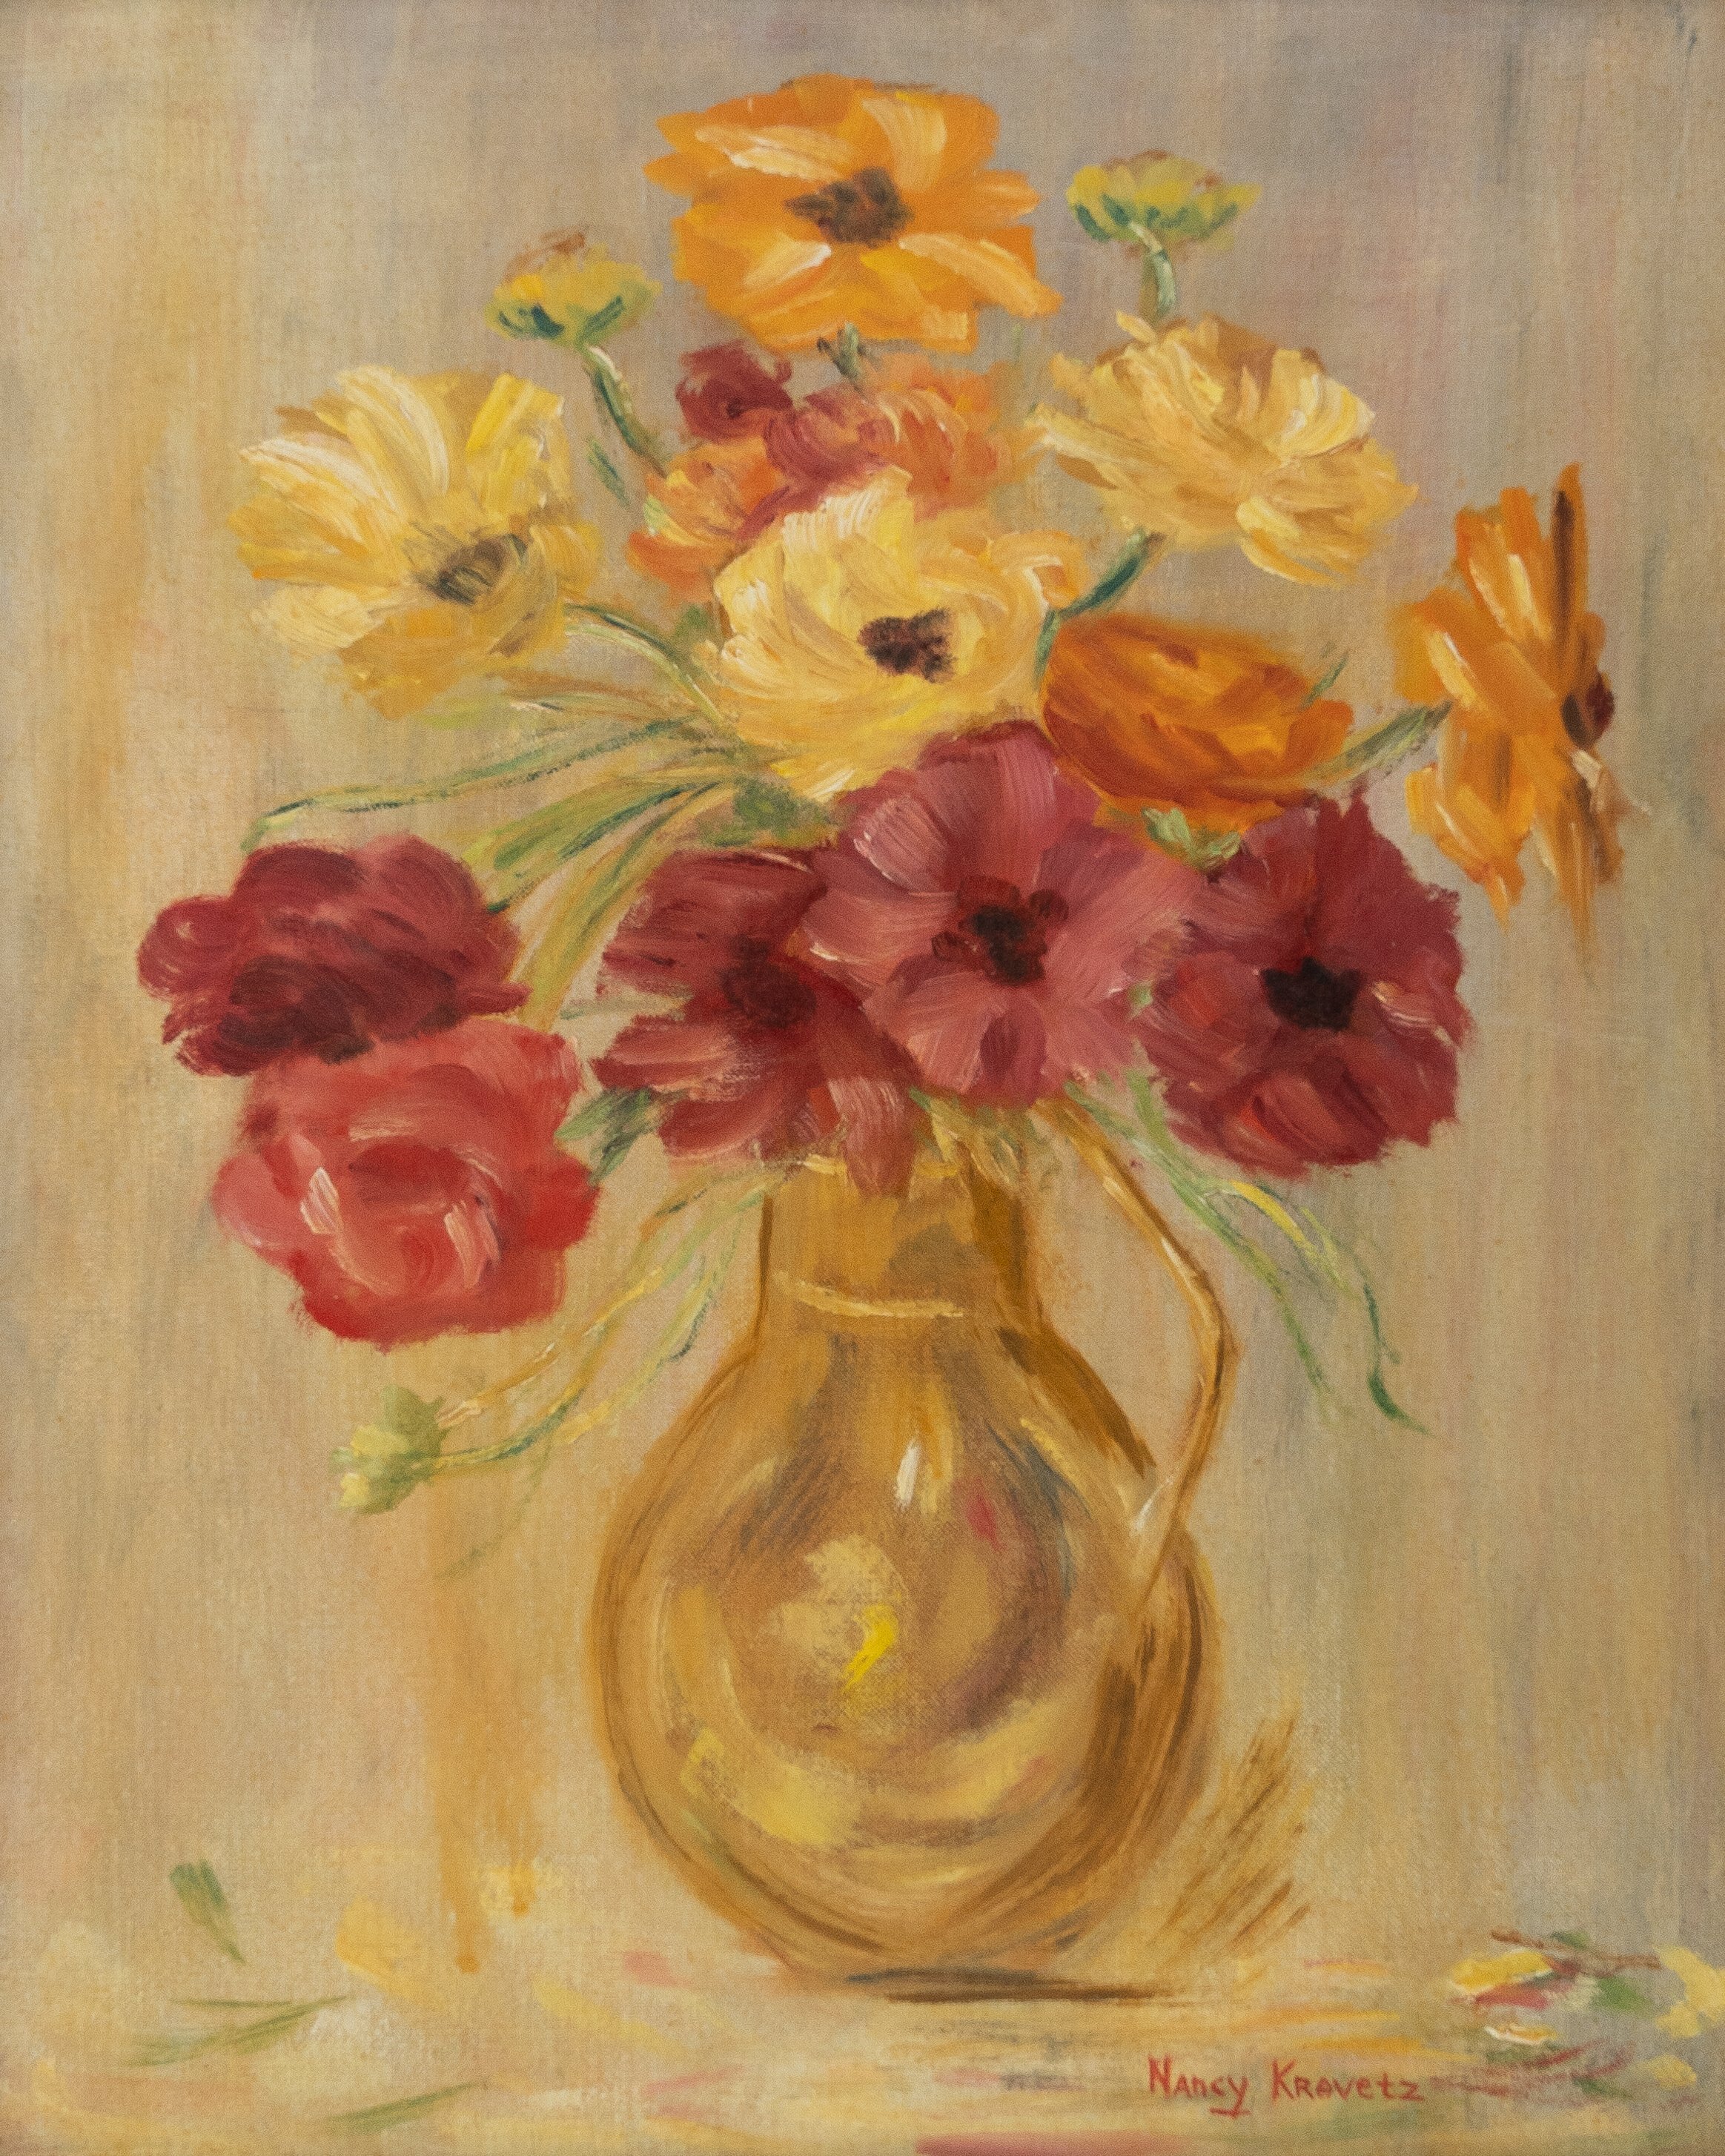 Bouquet of Flowers, 1962, oil on canvas, 20x16 inches